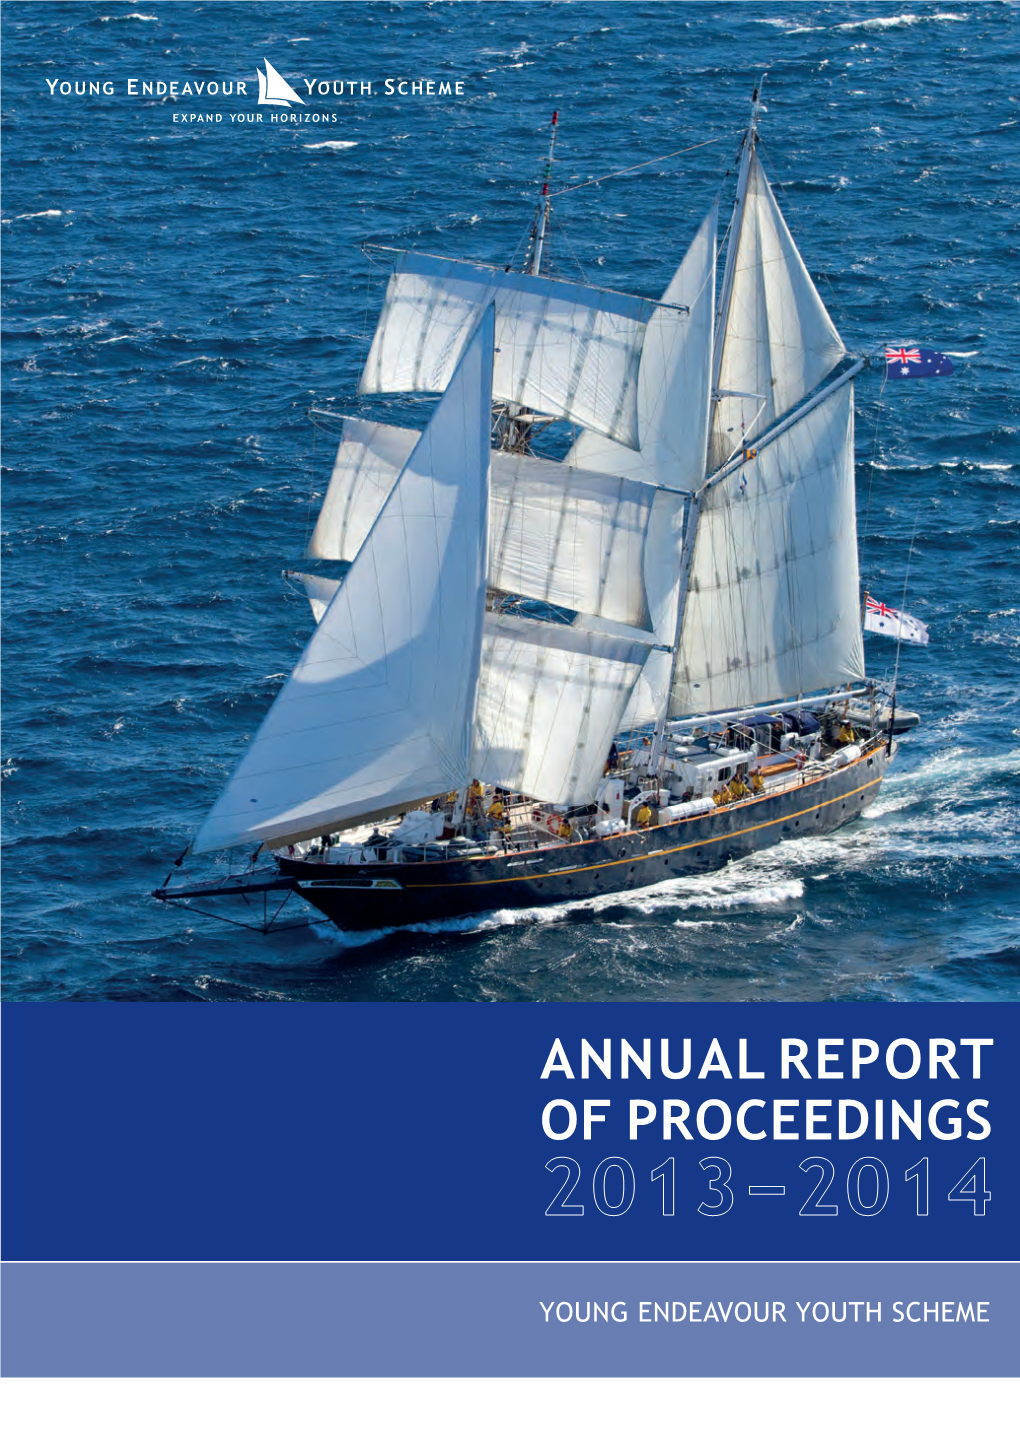 Young Endeavour Youth Scheme Annual Report of Proceedings 2013